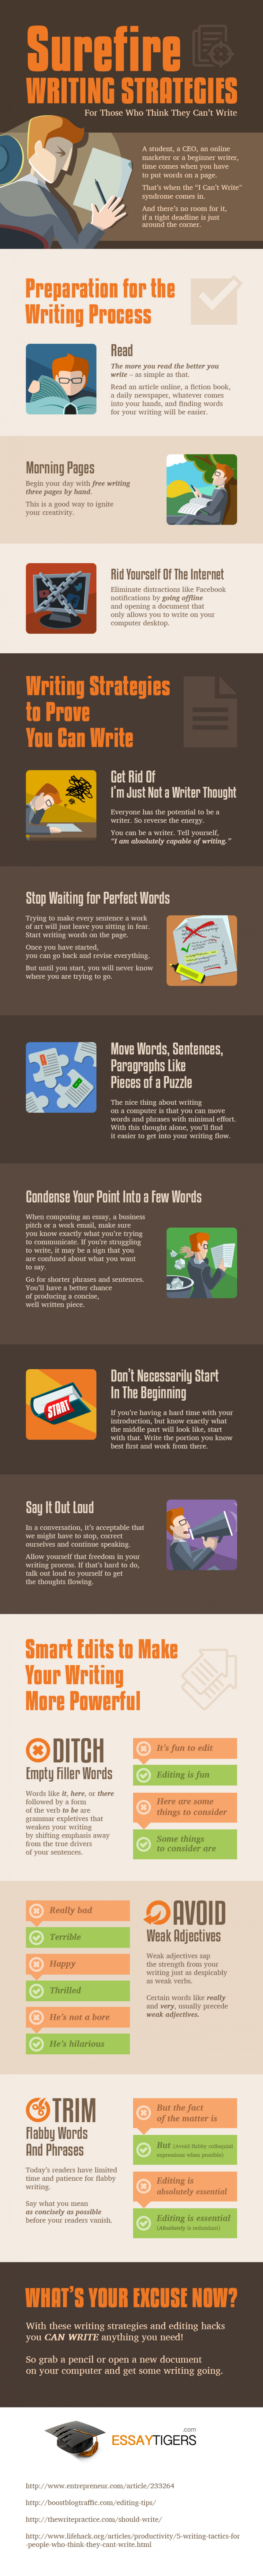 Surefire Writing Strategies for Those Who Think They Can't Write Infographic